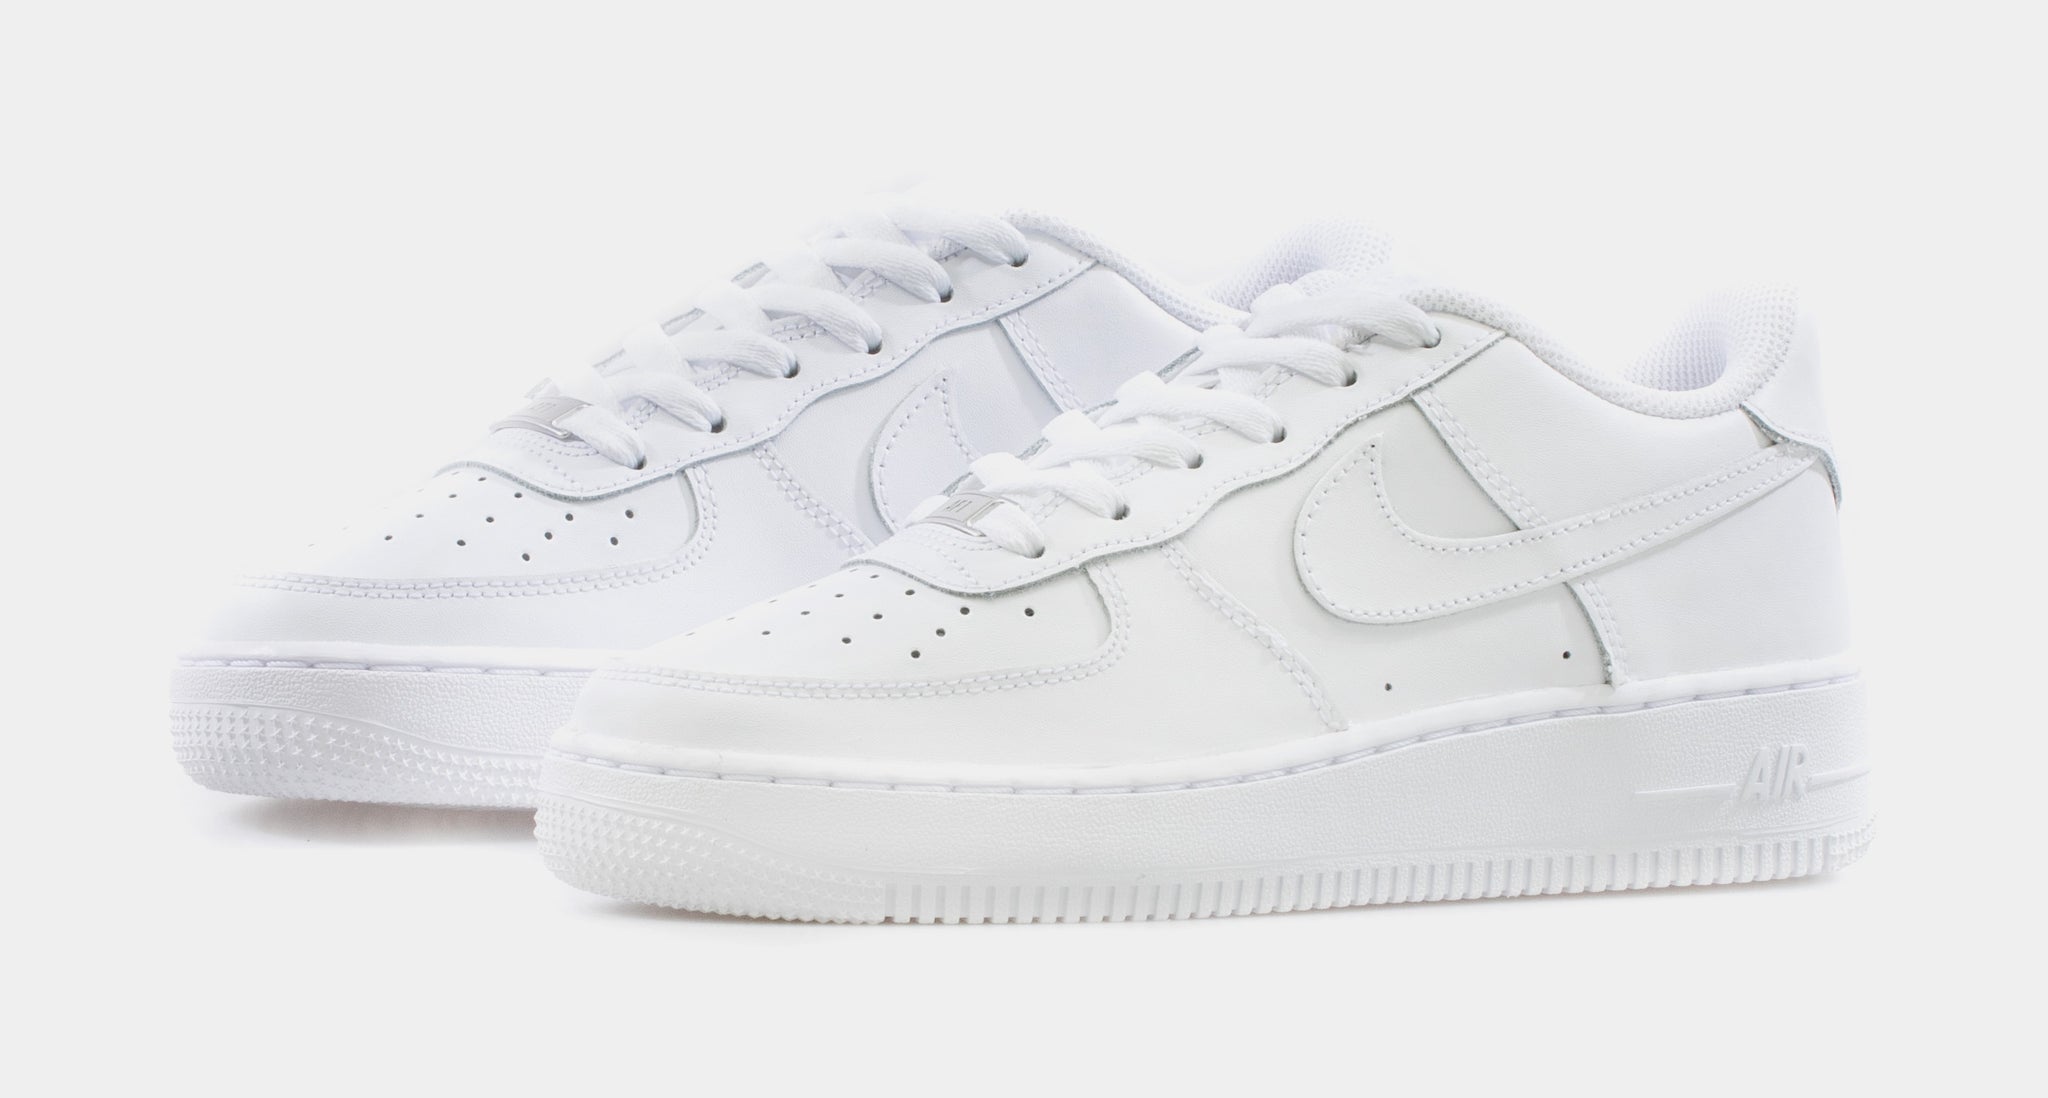 Where to buy Nike Air Force 1 Low “Cream/Plaid” shoes? Price and more  details explored.